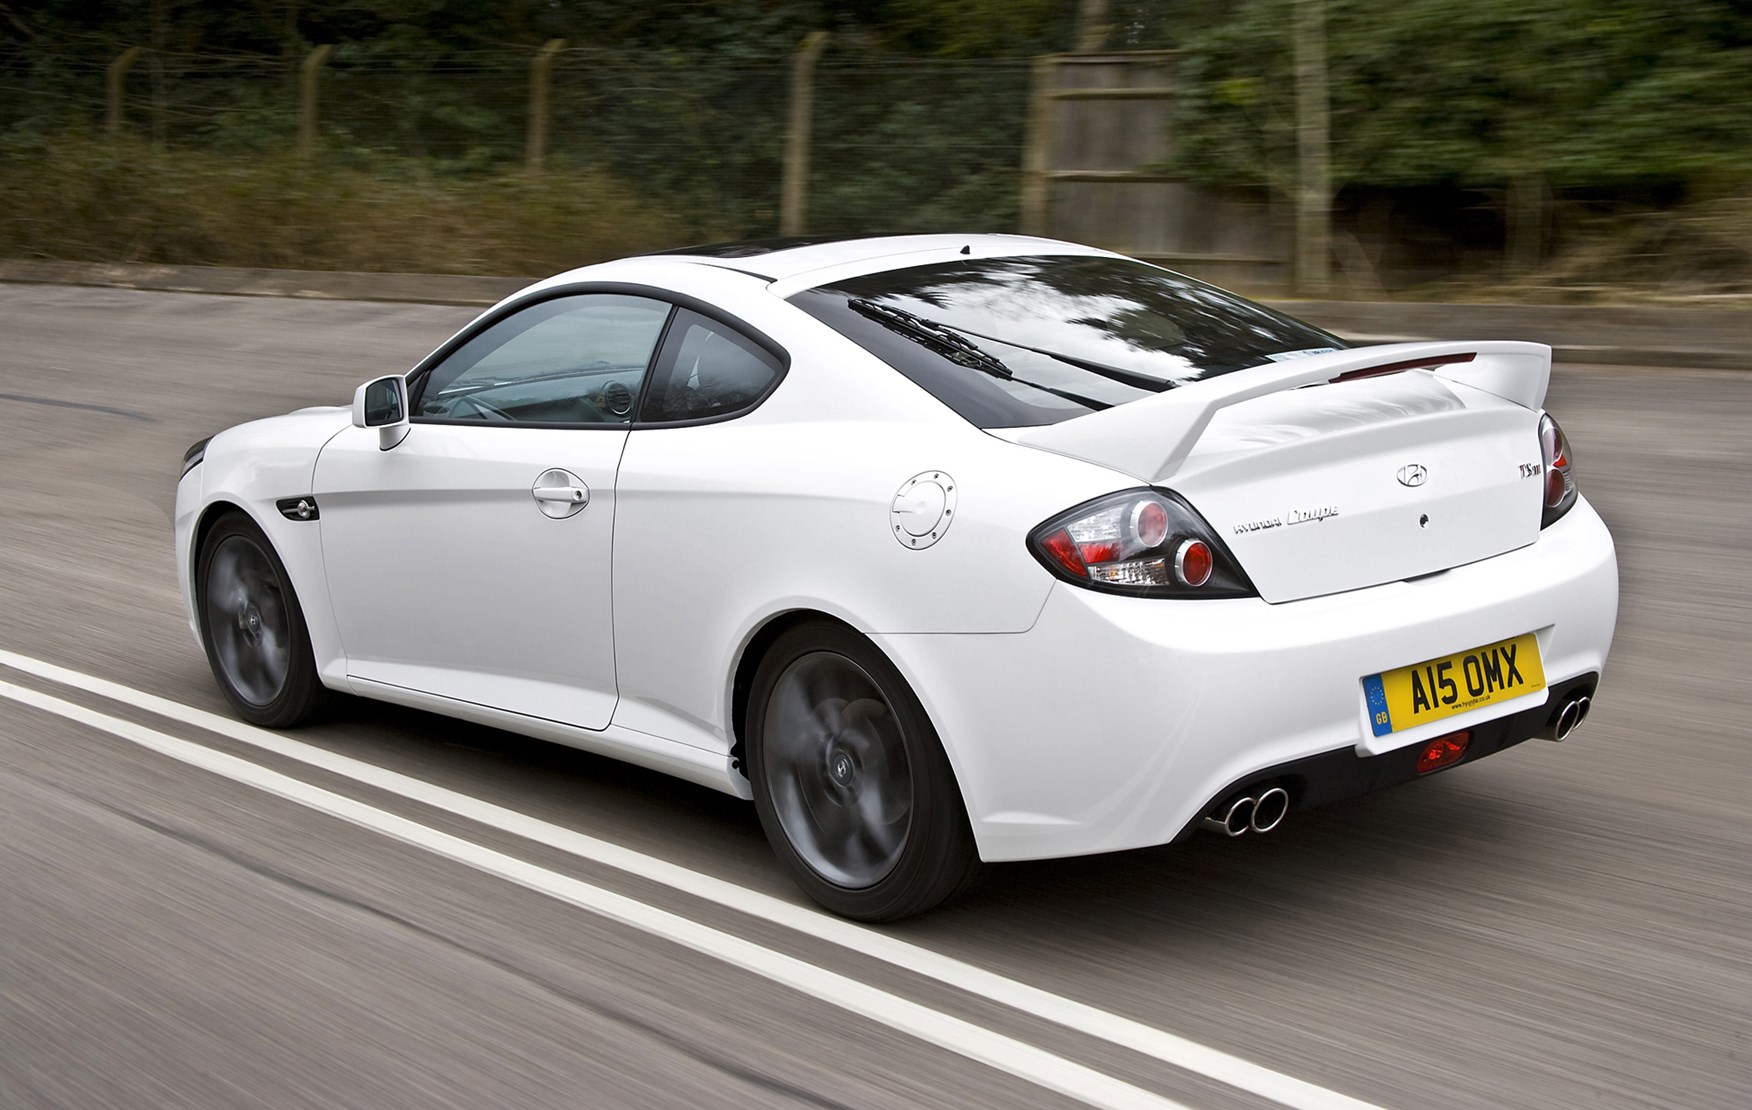 Hyundai Coupe II (GK) Restyling 2007 - 2009 Coupe #1